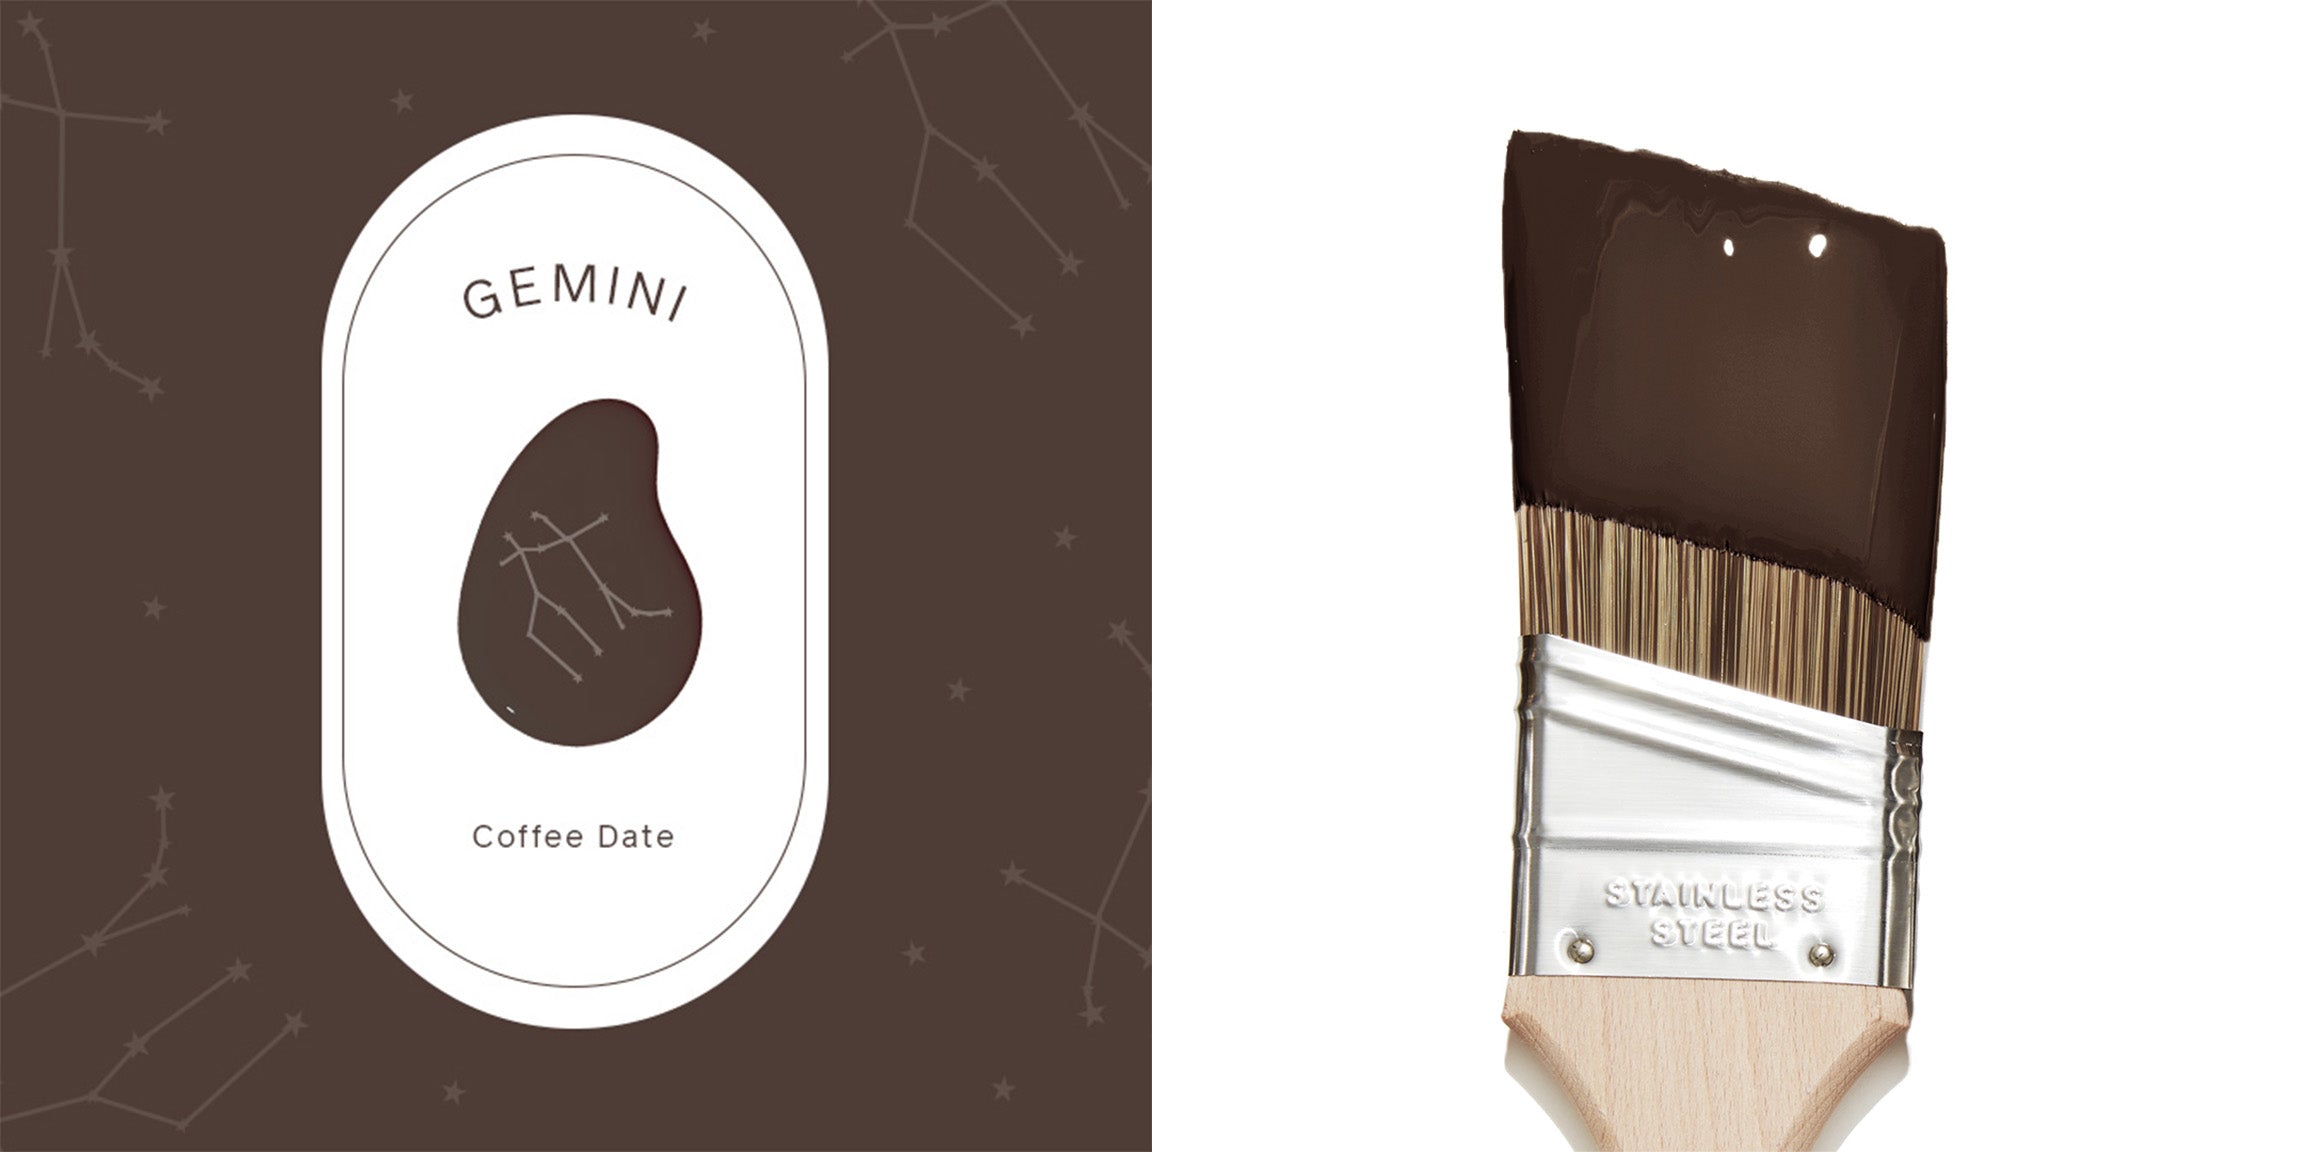 Get your 2023 horoscope and find the perfect paint colors for your zodiac. For Gemini, it’s Coffee Date — a rich brown paint color from Clare.